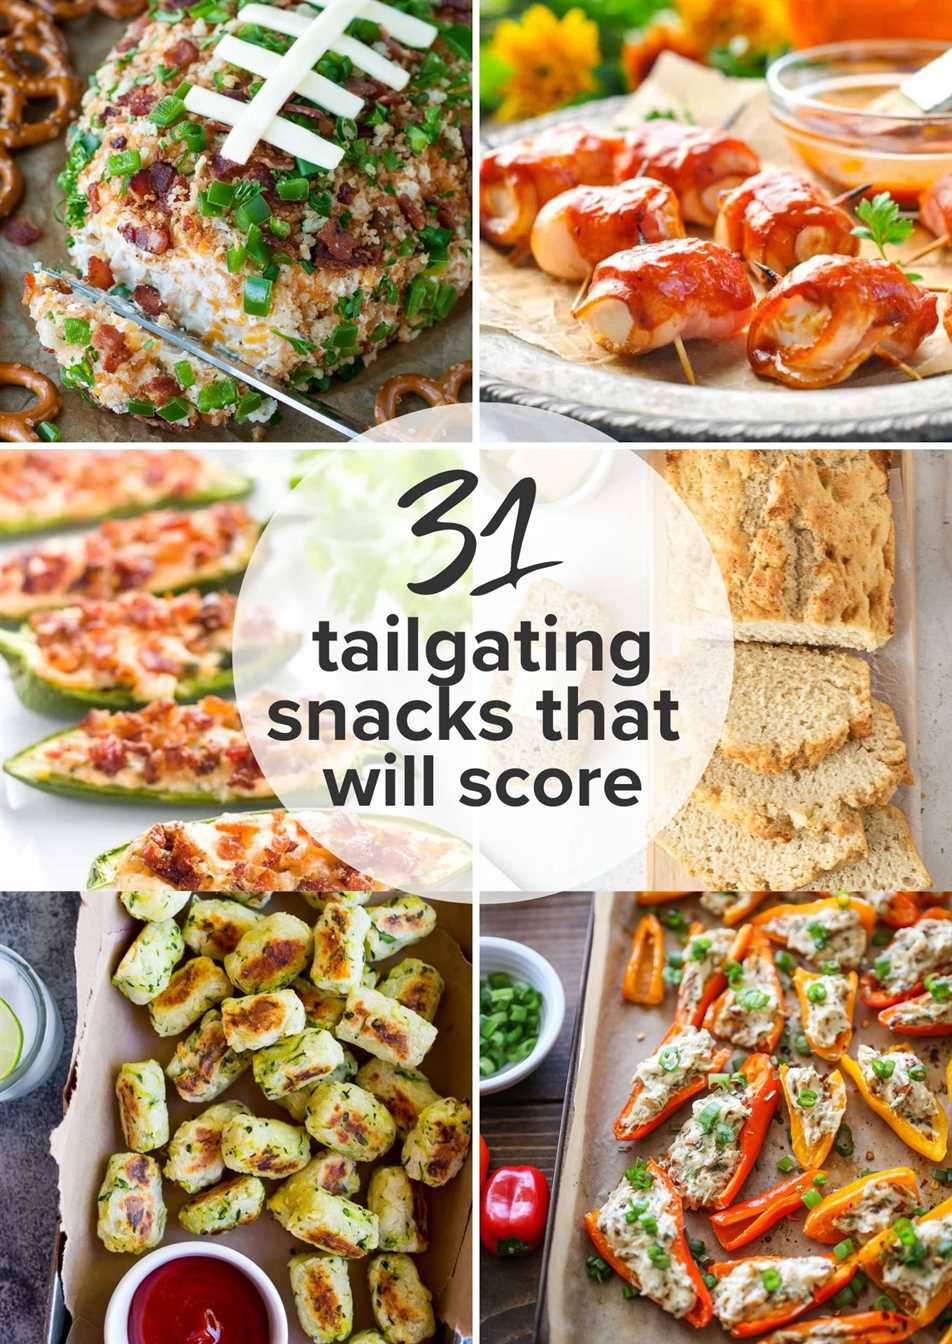 Tailgating snack recipes with zucchini tots, cheese ball and more